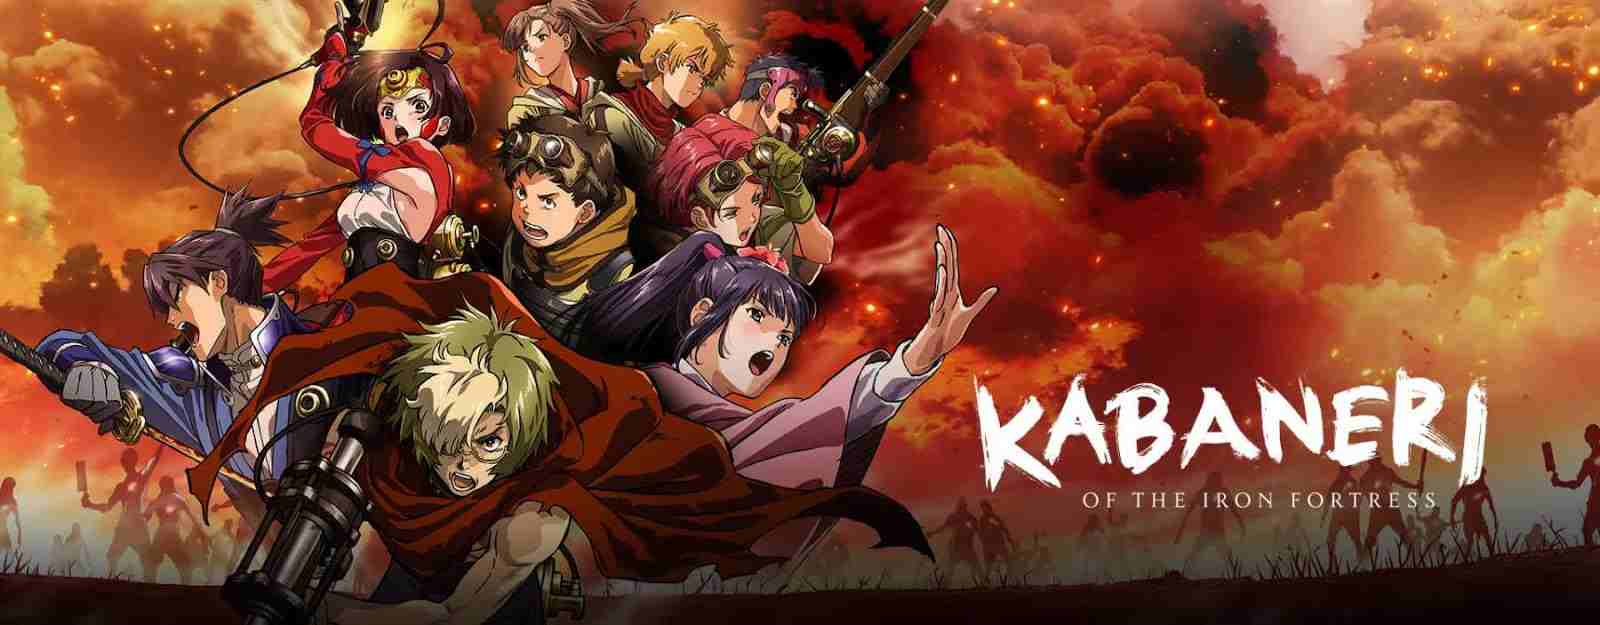 kabaneri of the iron fortress review 1 lg